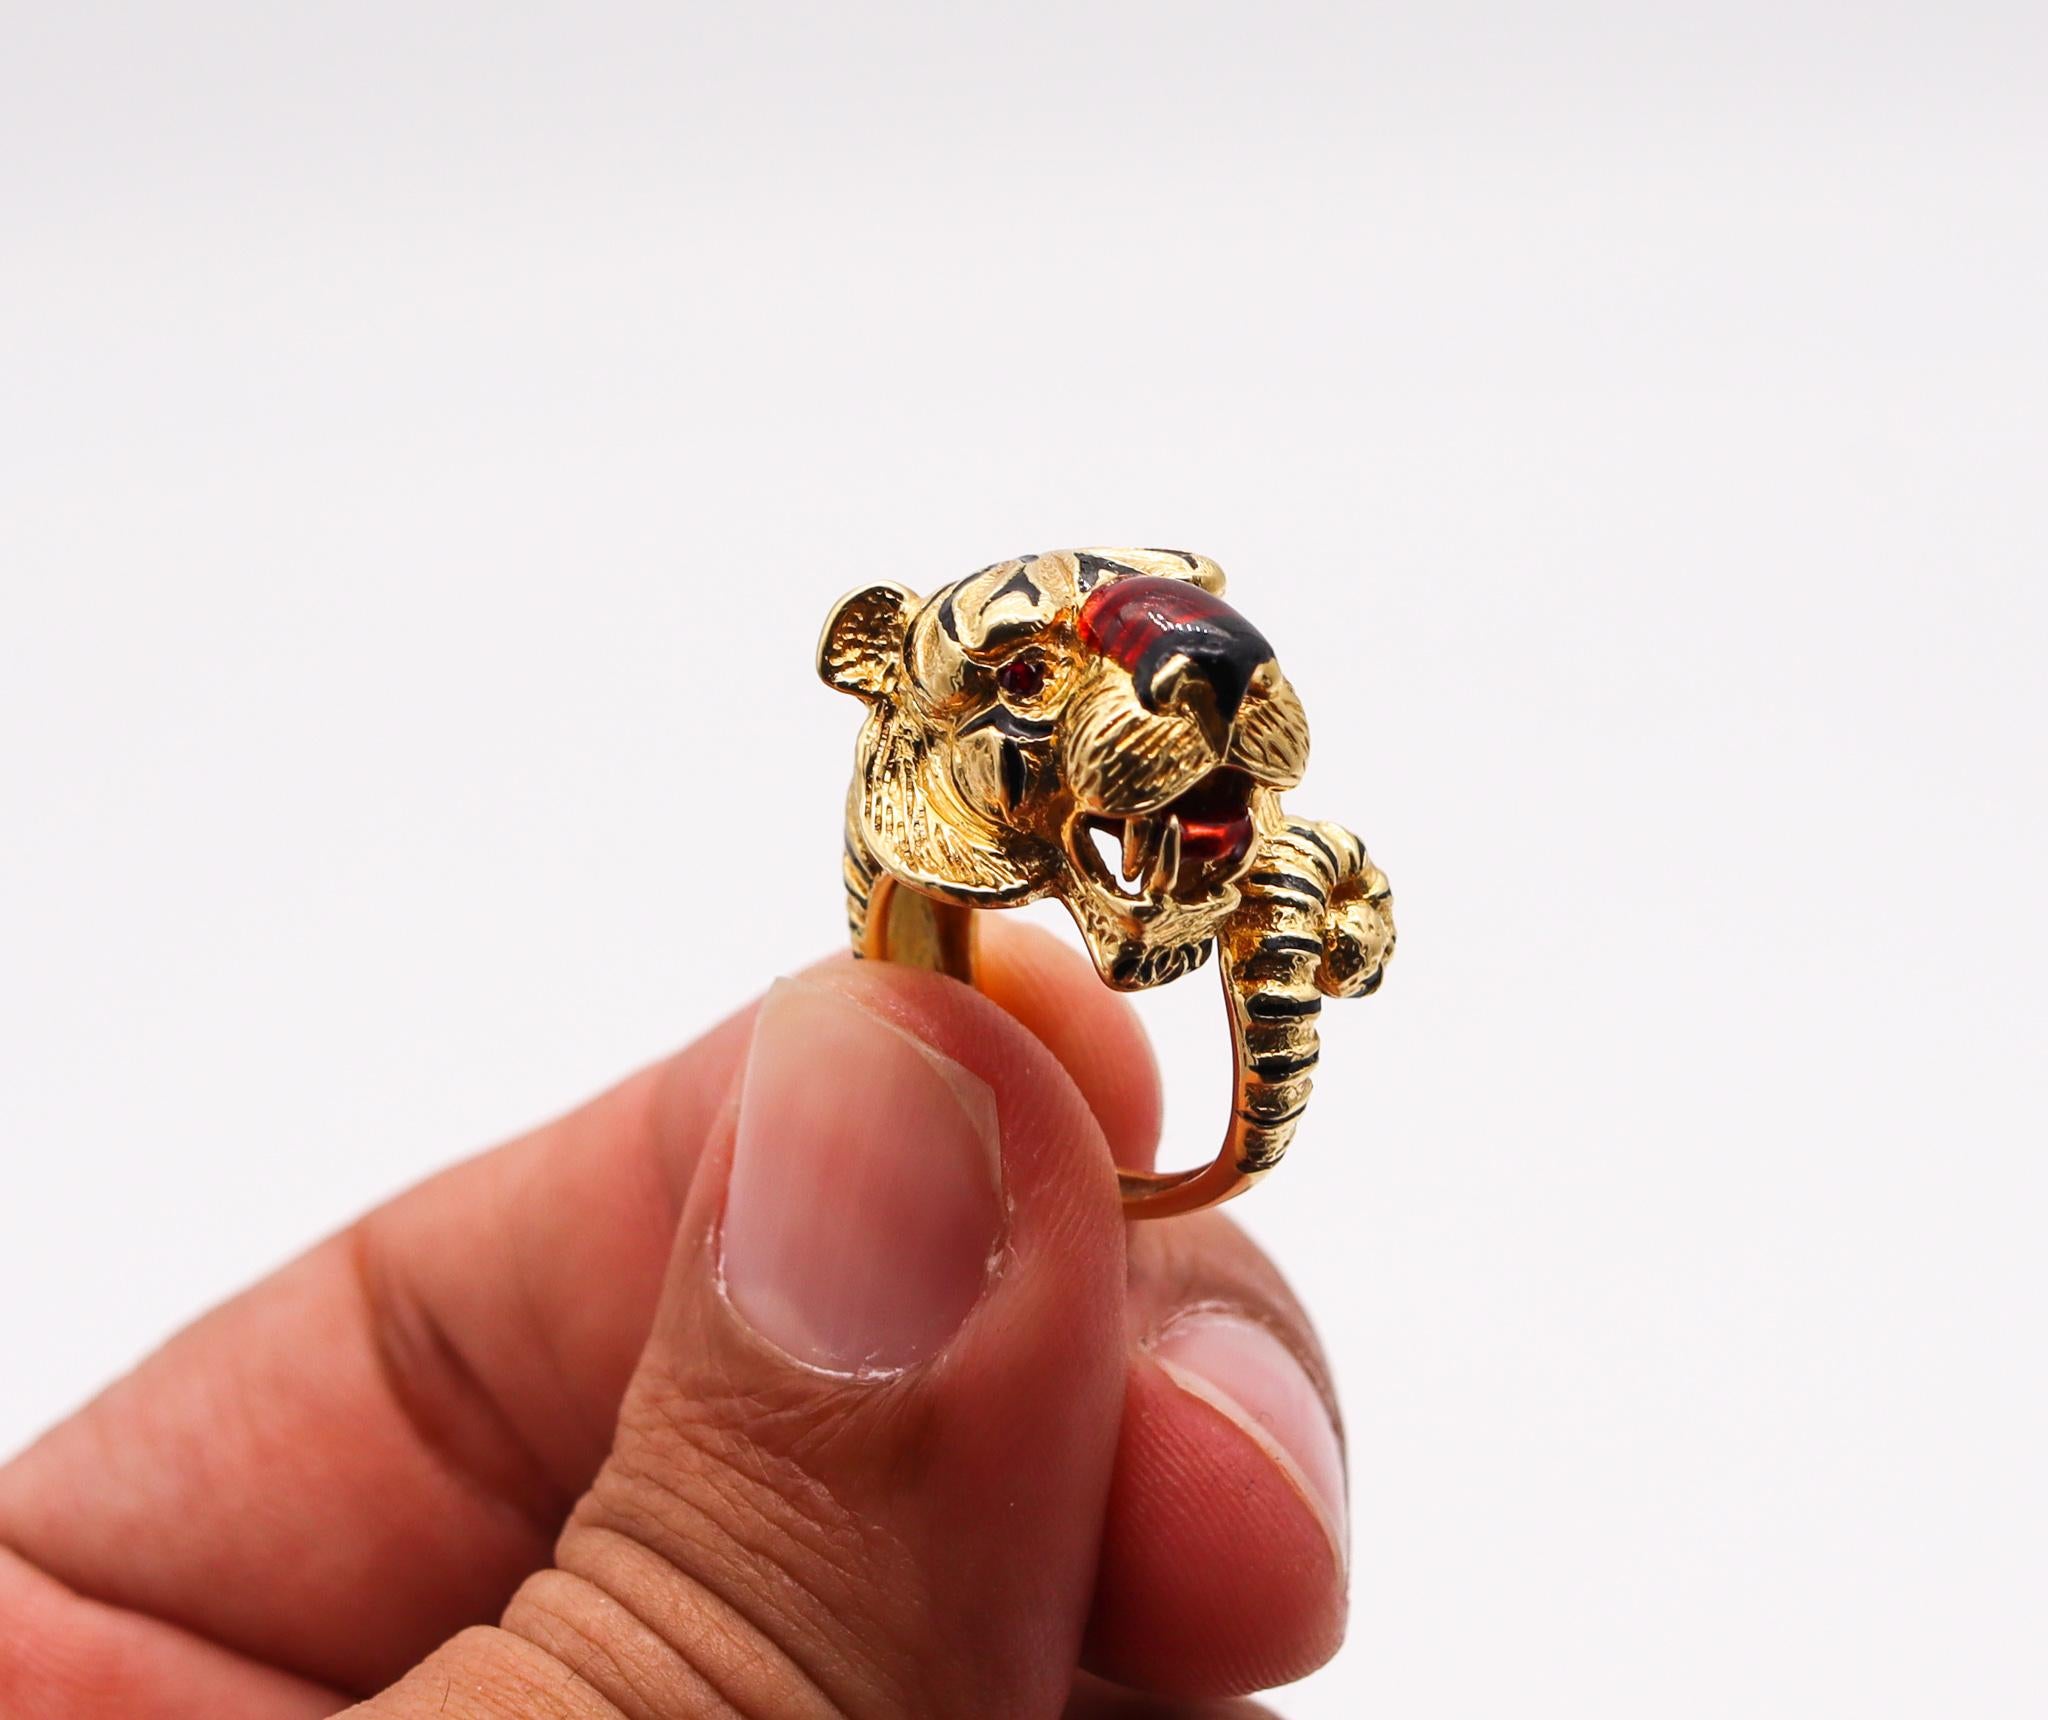 Brilliant Cut Frascarolo Milano Enameled Tiger Cocktail Ring in 18Kt Yellow Gold with 2 Rubies For Sale